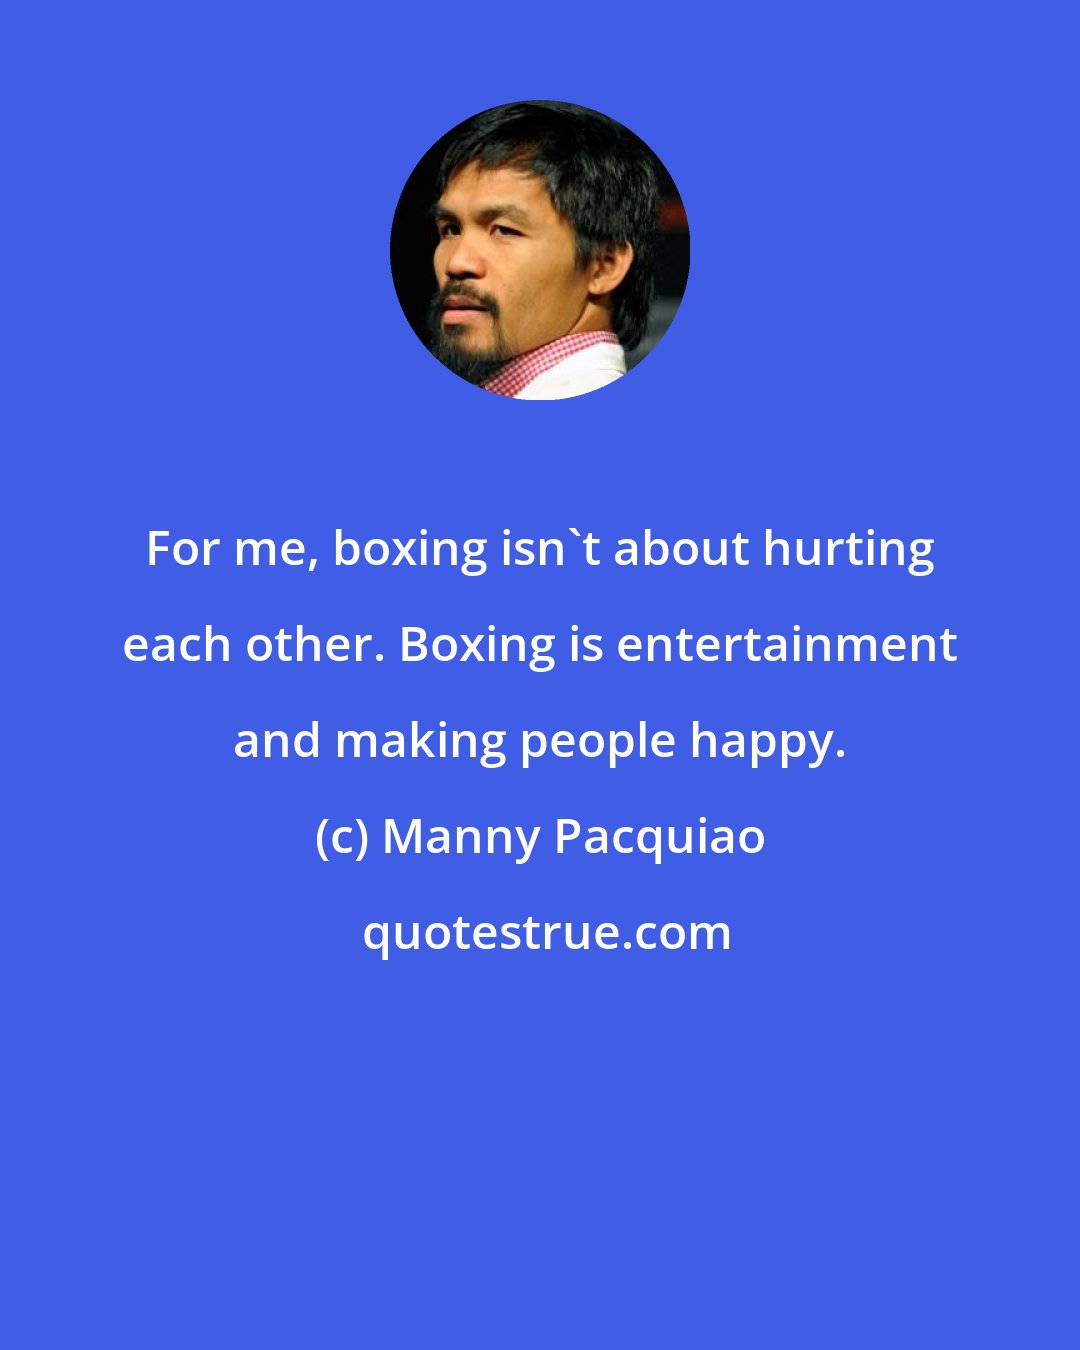 Manny Pacquiao: For me, boxing isn't about hurting each other. Boxing is entertainment and making people happy.